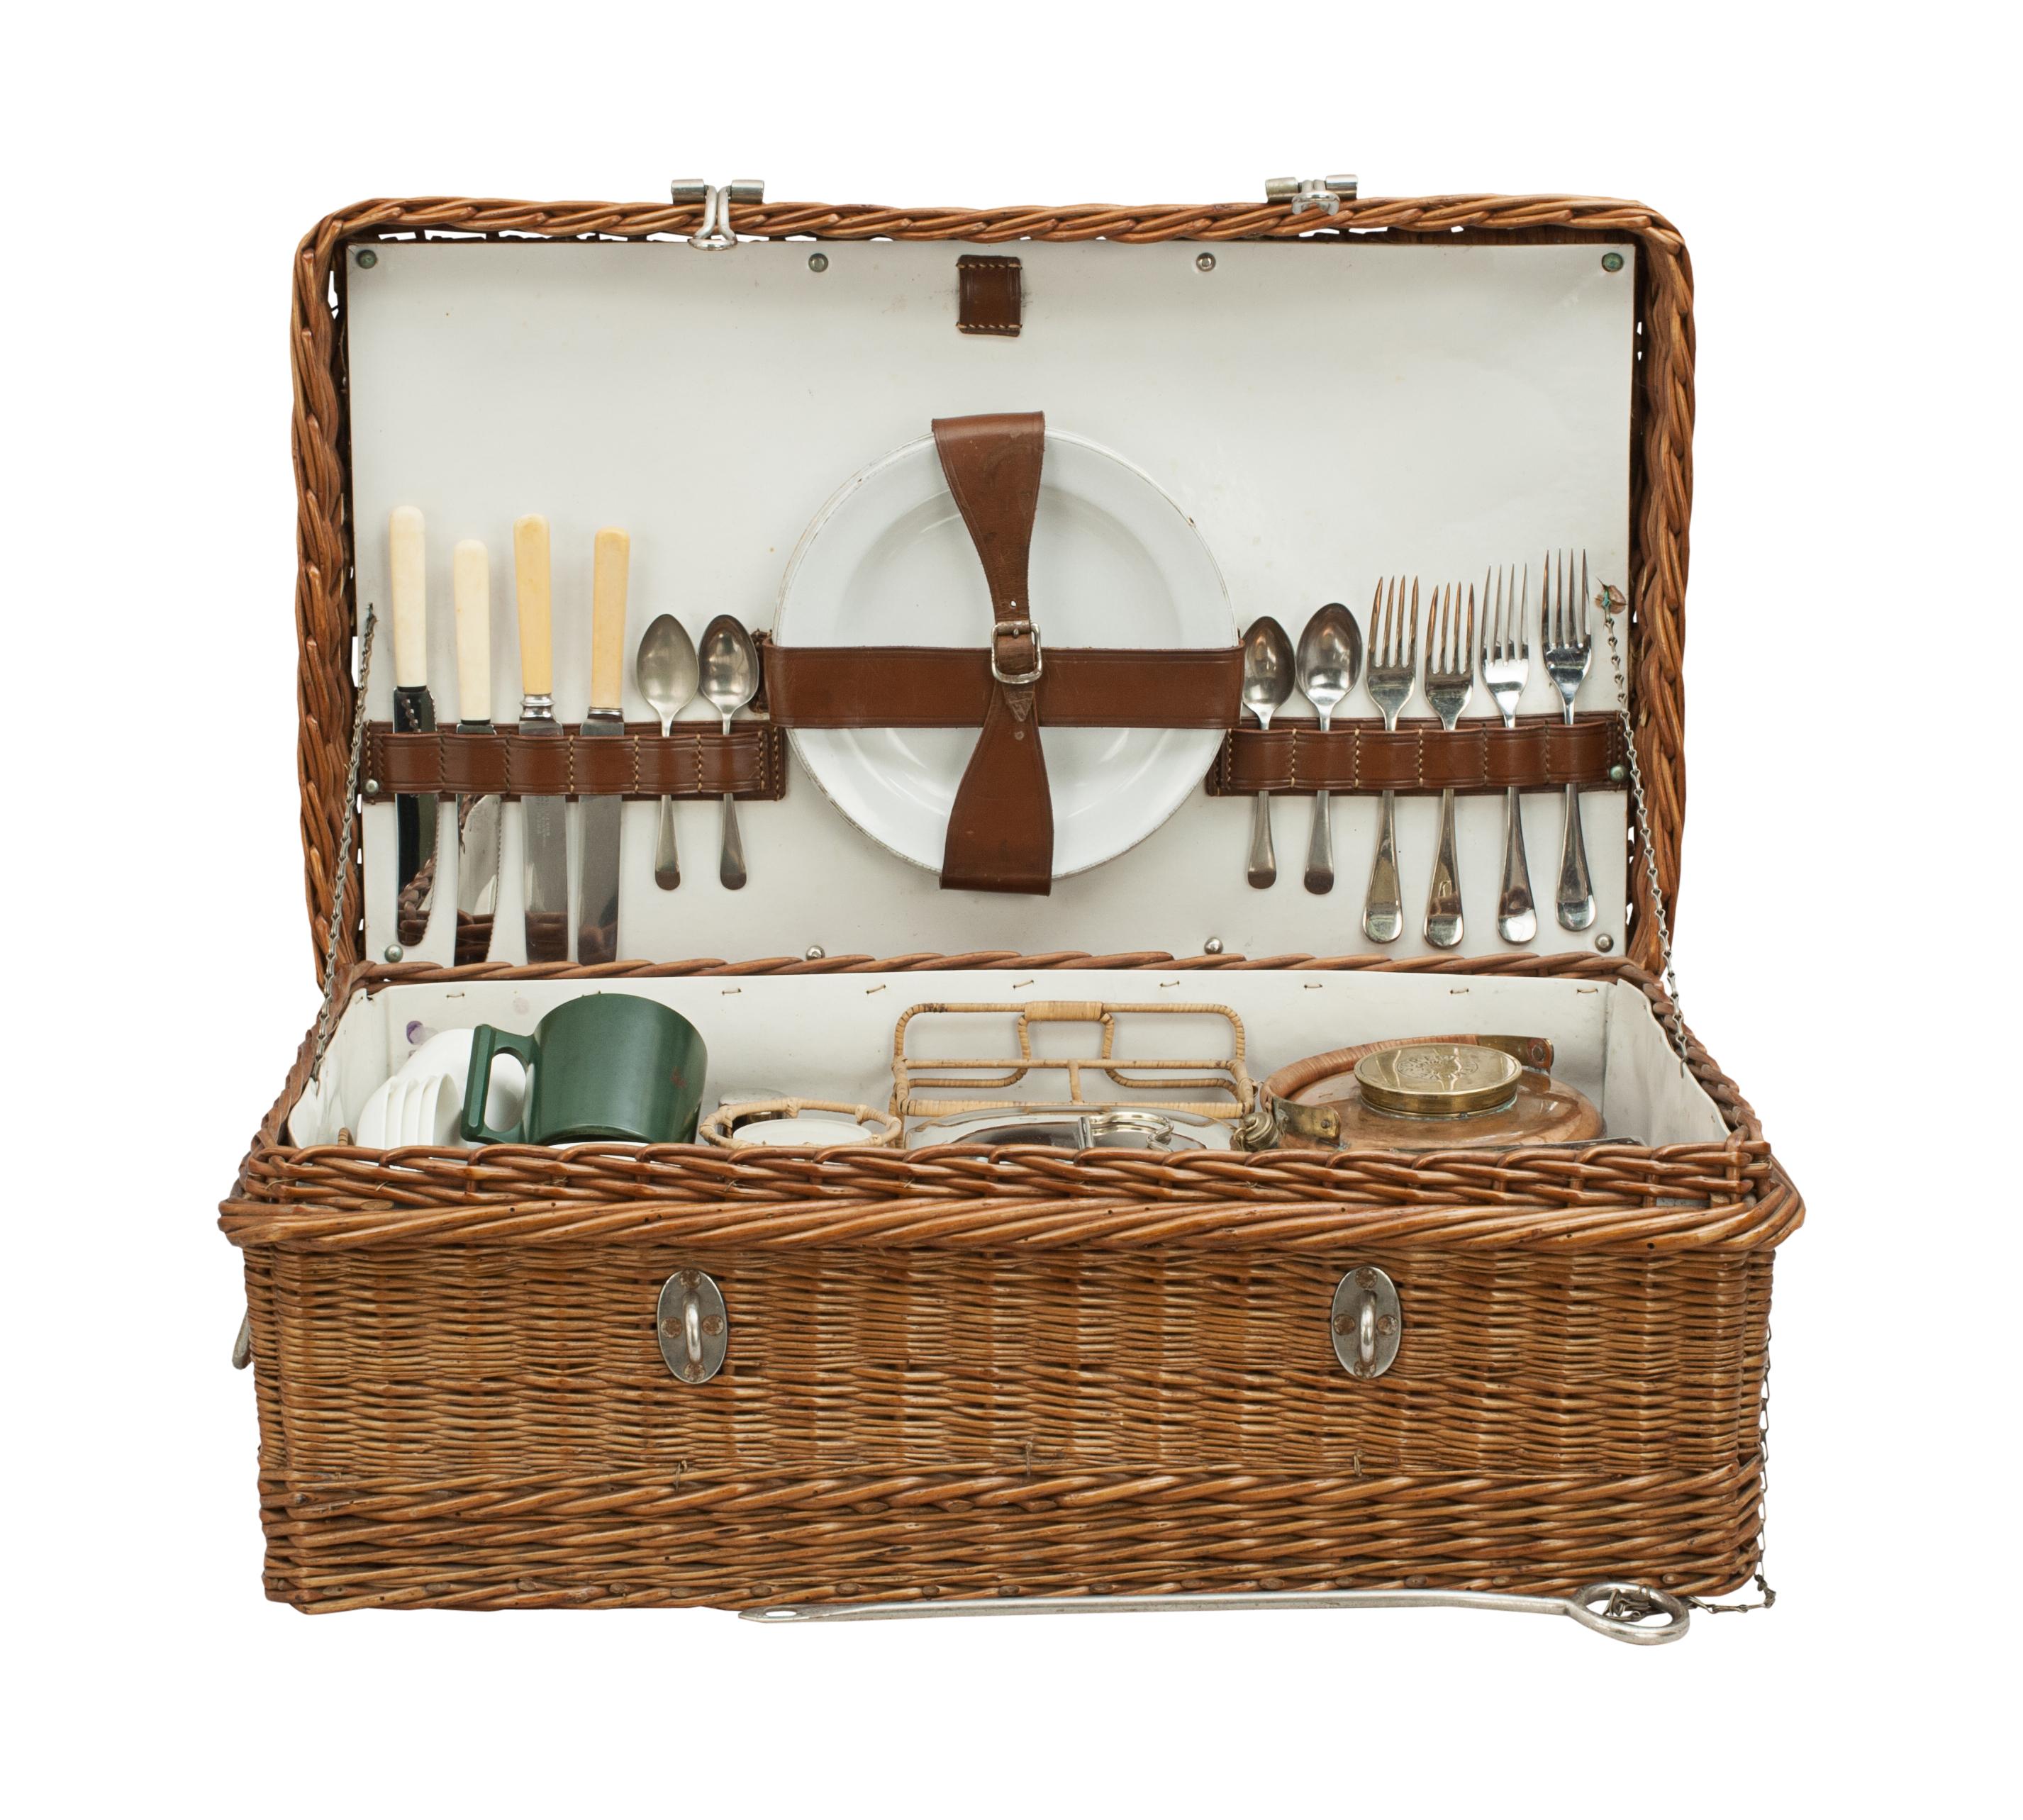 Vintage picnic set.
A charming wicker basket four person picnic set with metal carry handles on both sides and a lockable metal bar at the front. The contents are held in place in the lid by leather strapping and in the base by an internal wicker